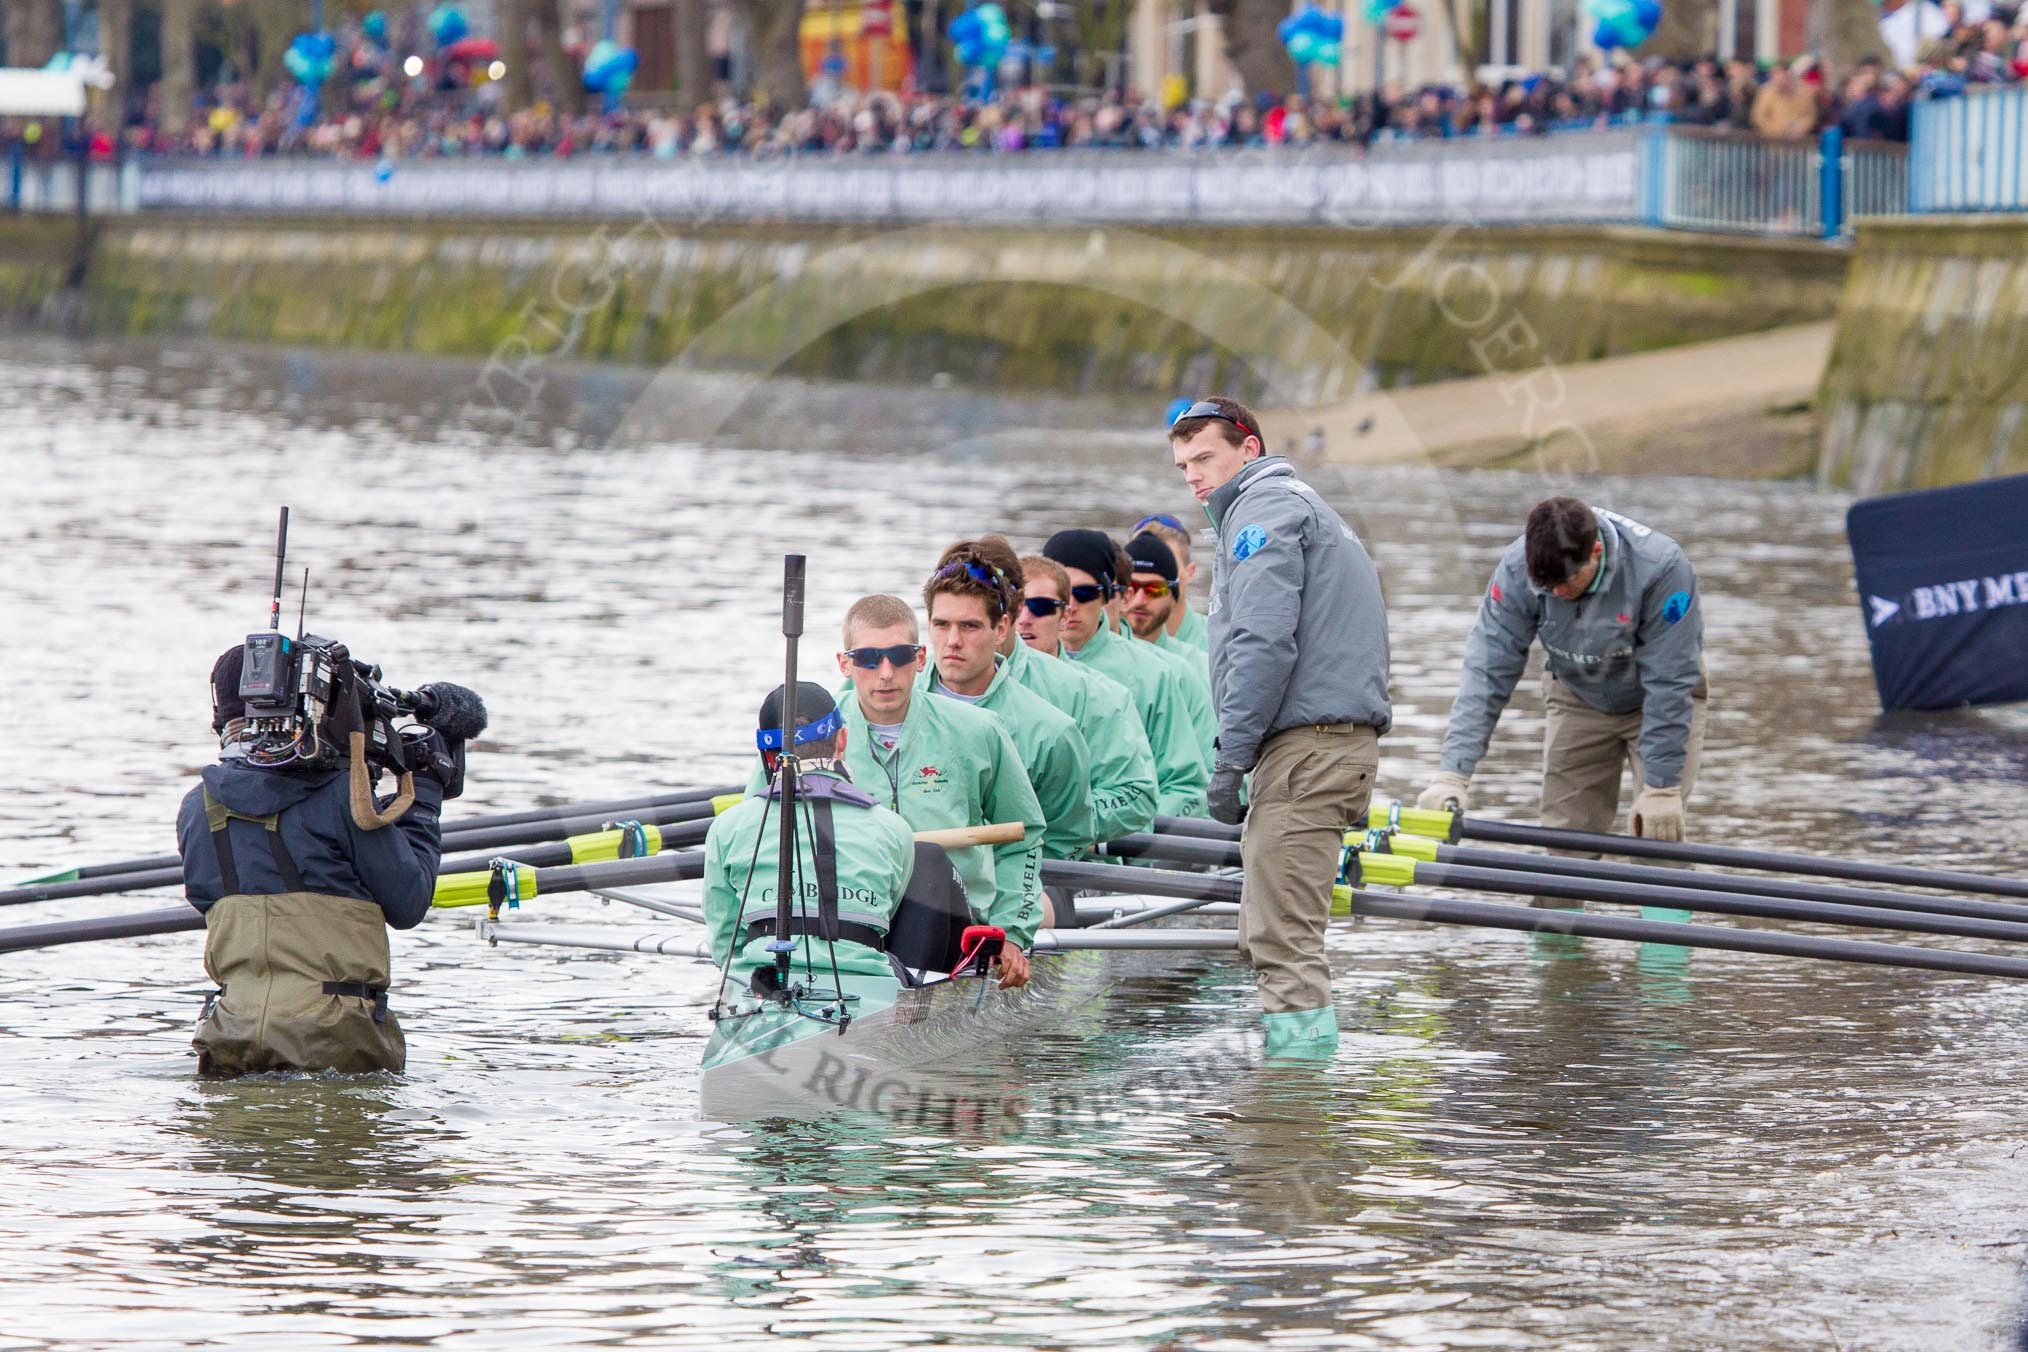 The Boat Race 2013.
Putney,
London SW15,

United Kingdom,
on 31 March 2013 at 15:48, image #169